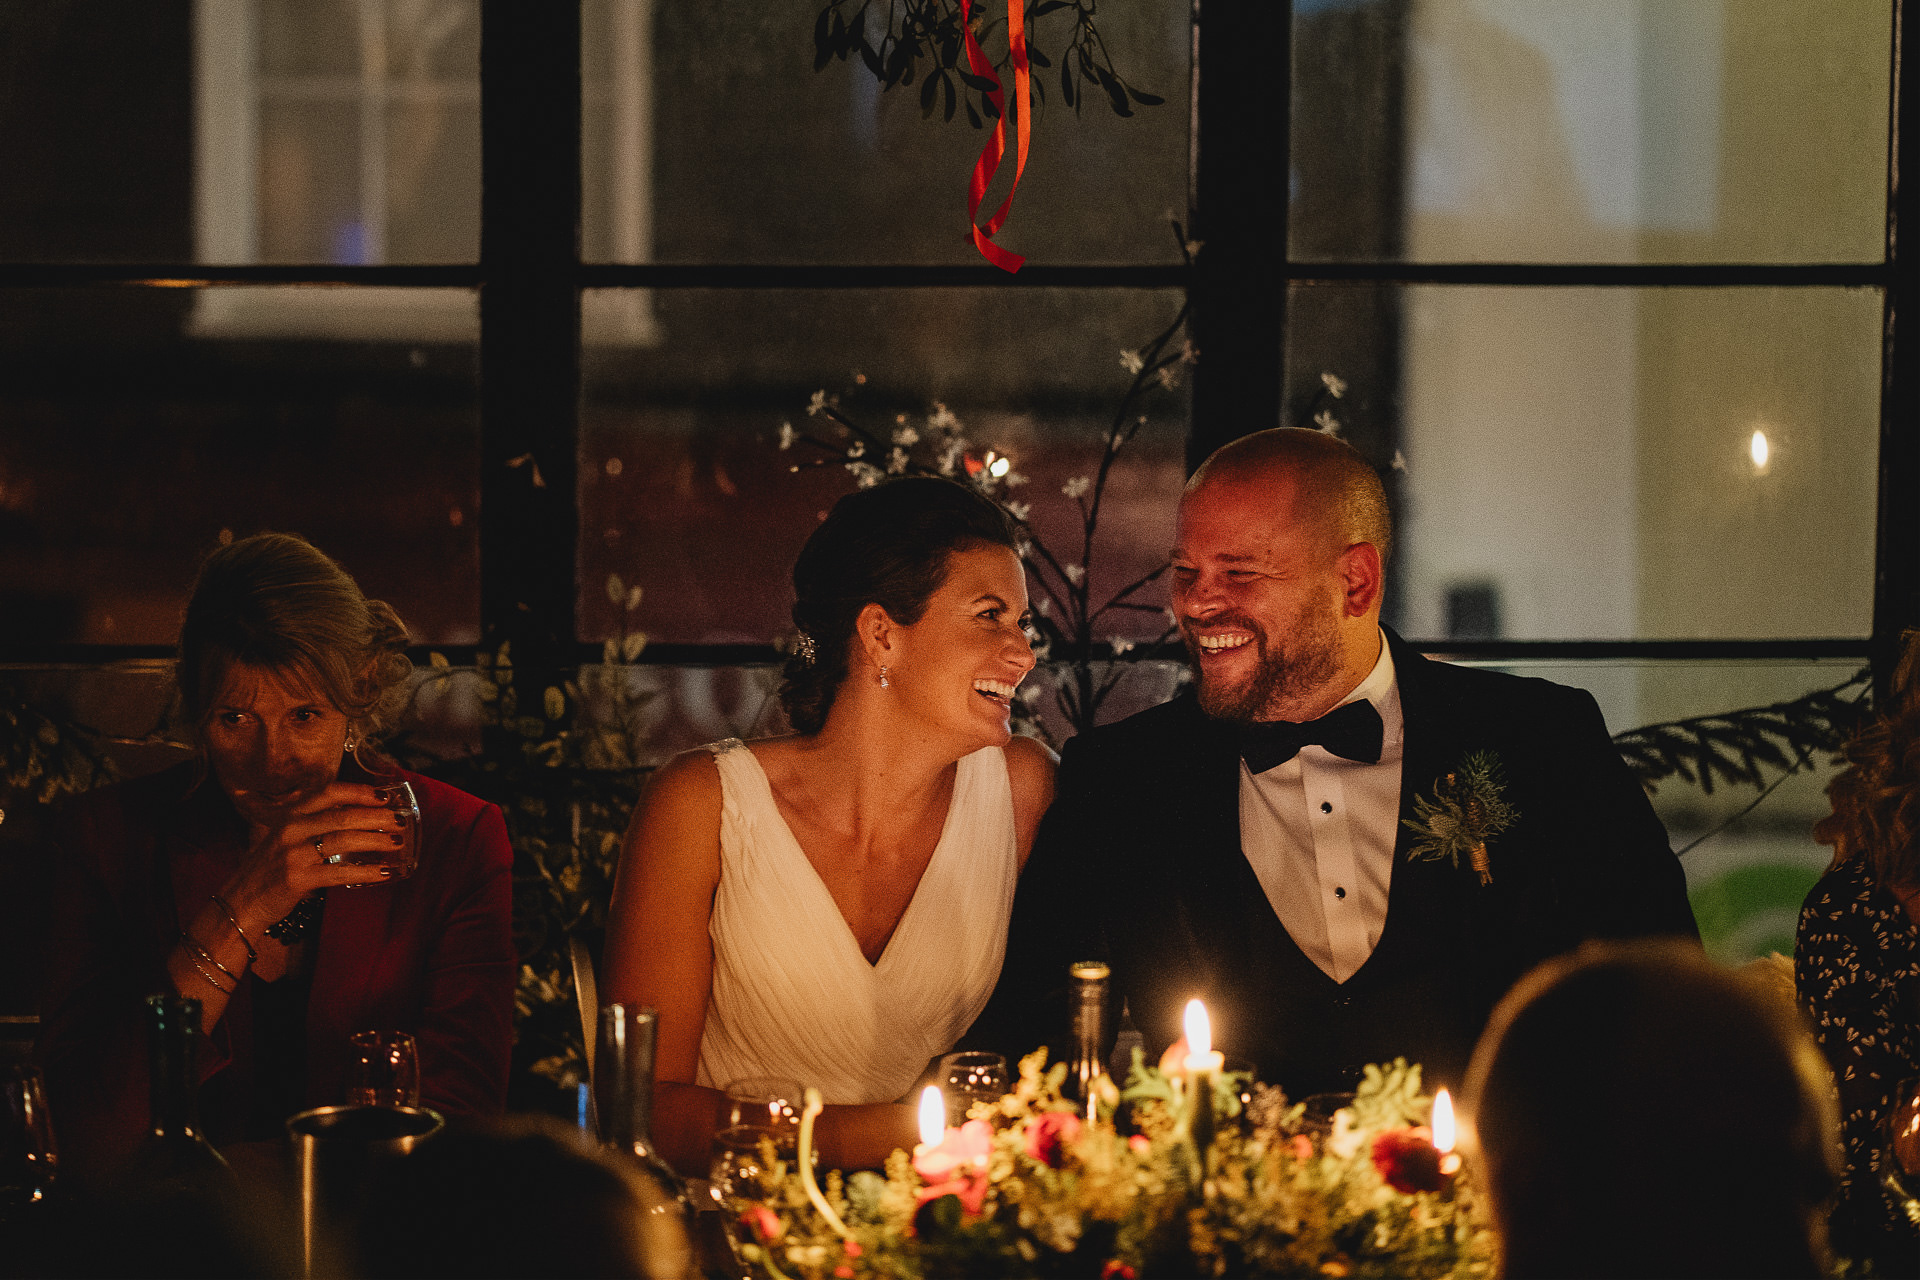 Bride and groom laughing together at a dinner table